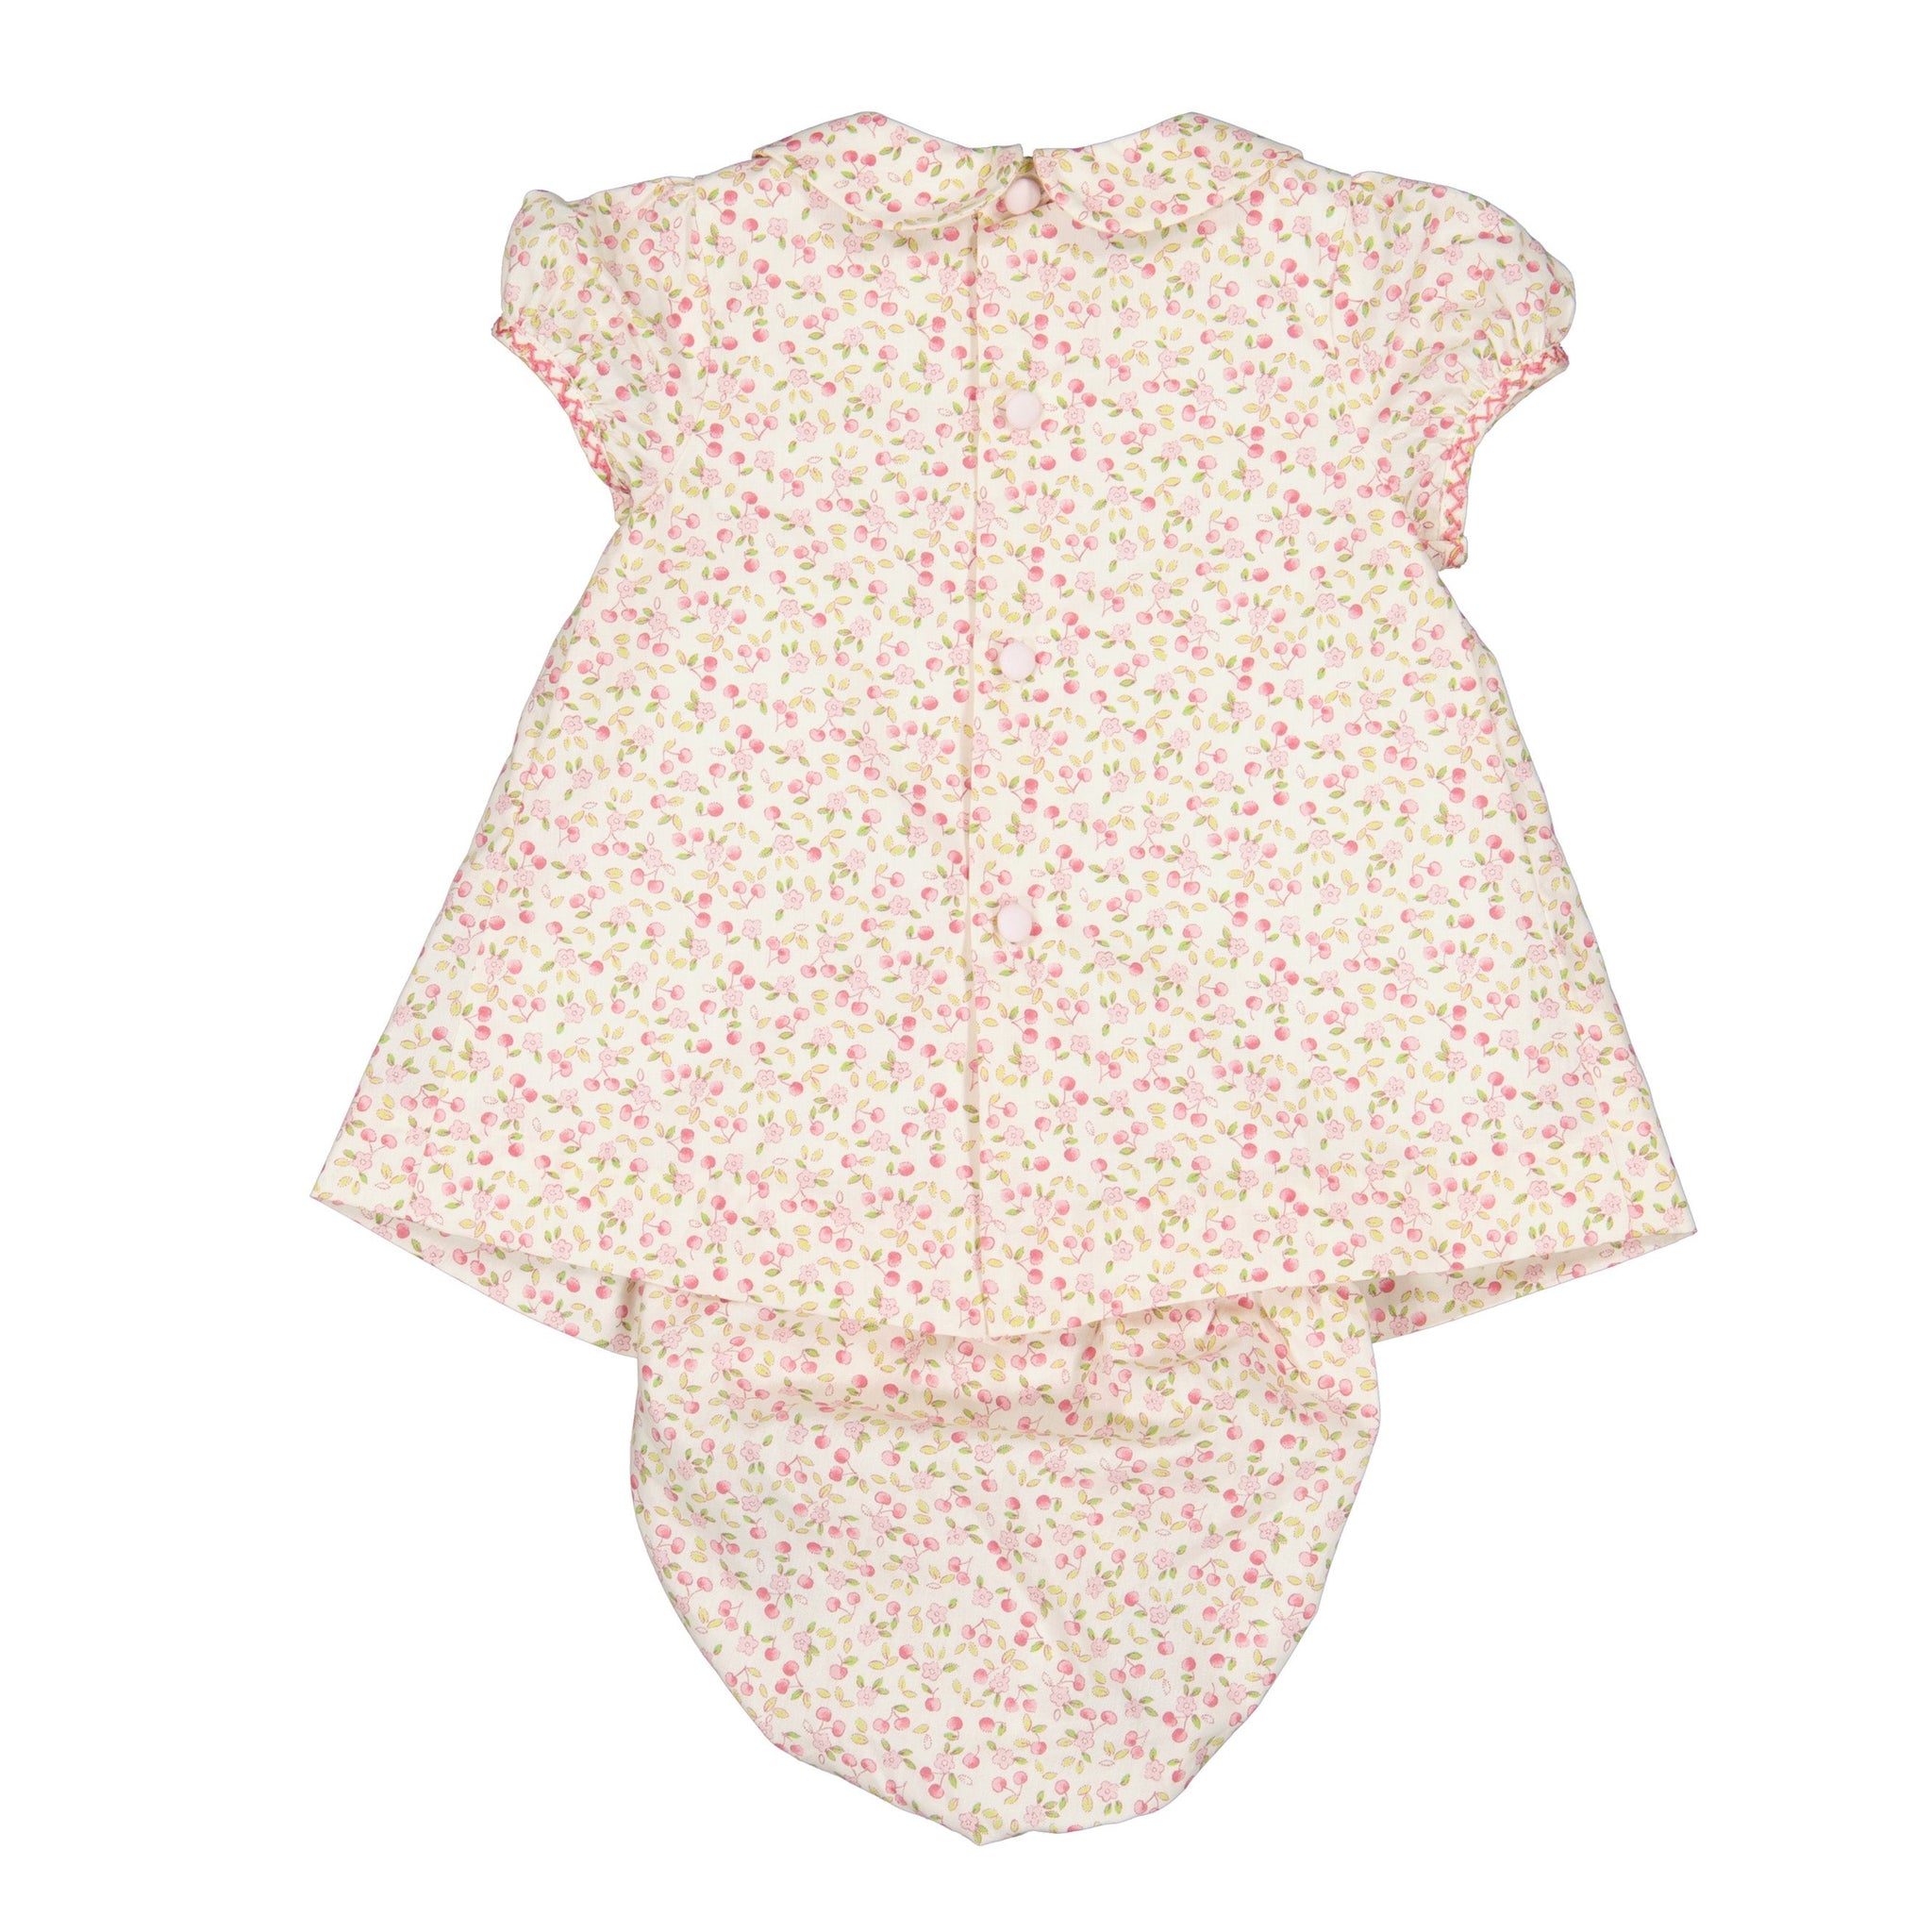 CHERRY FLORAL BABY SET